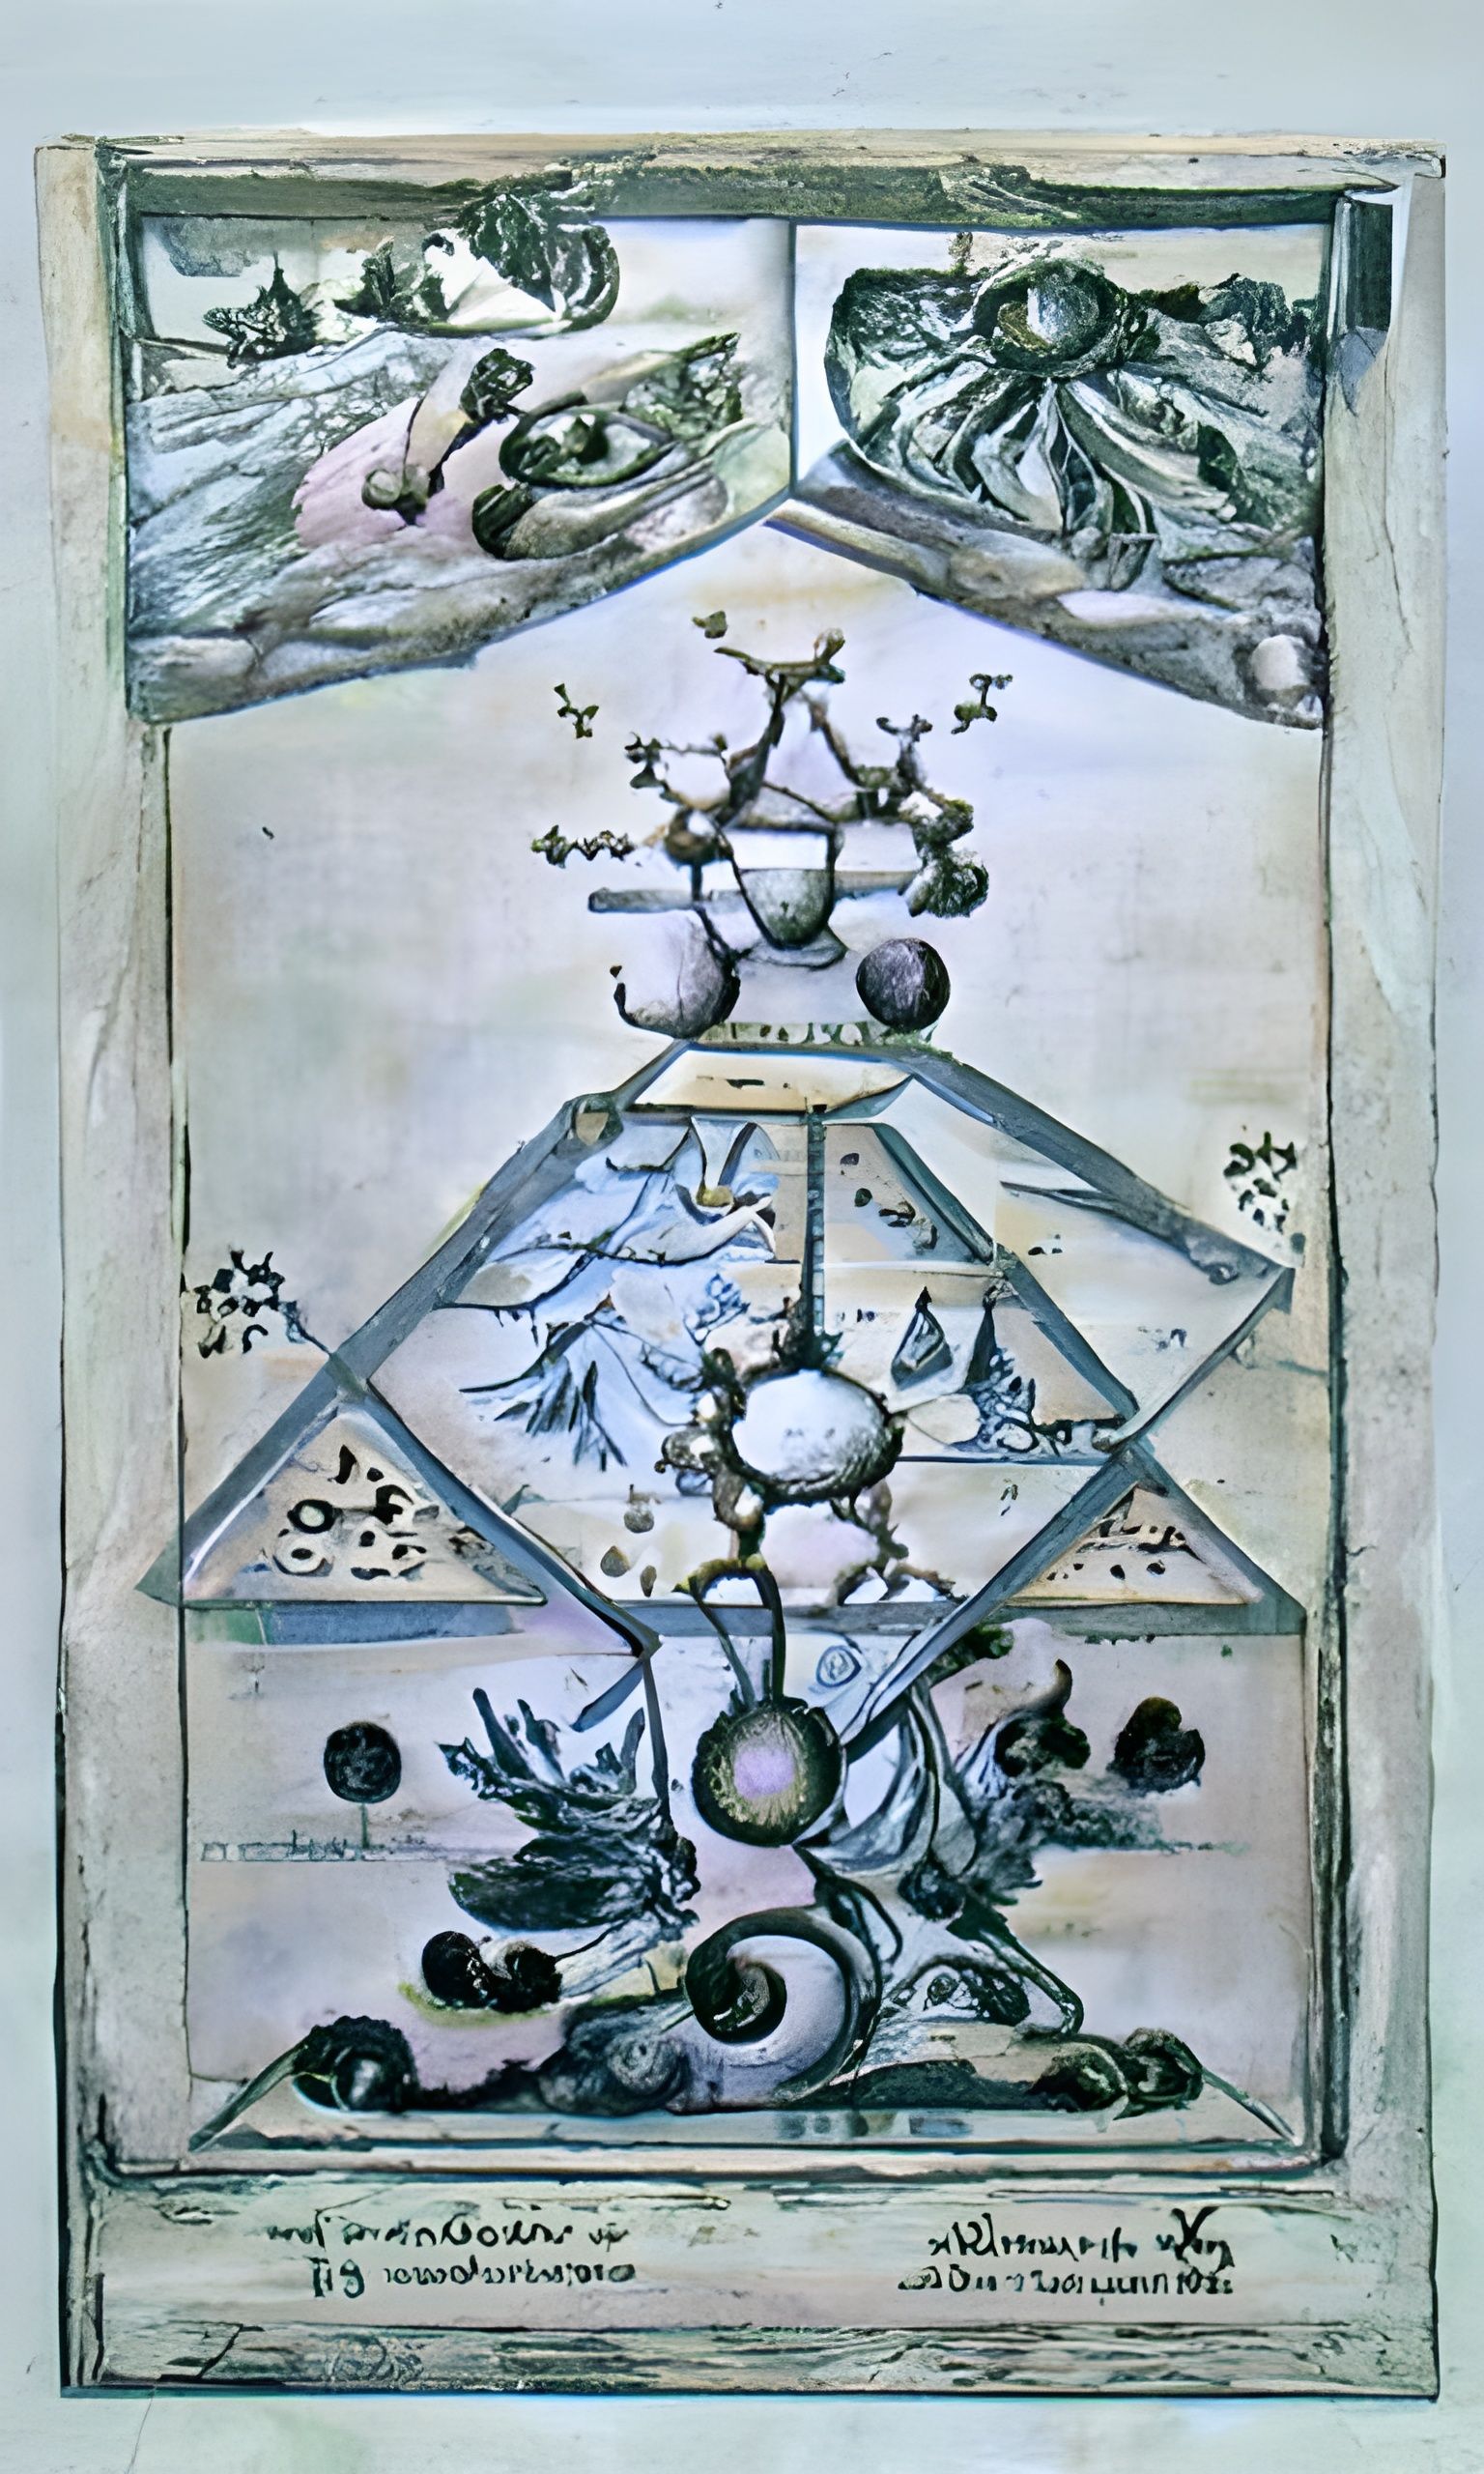 lithograph of medieval fractal alchemy